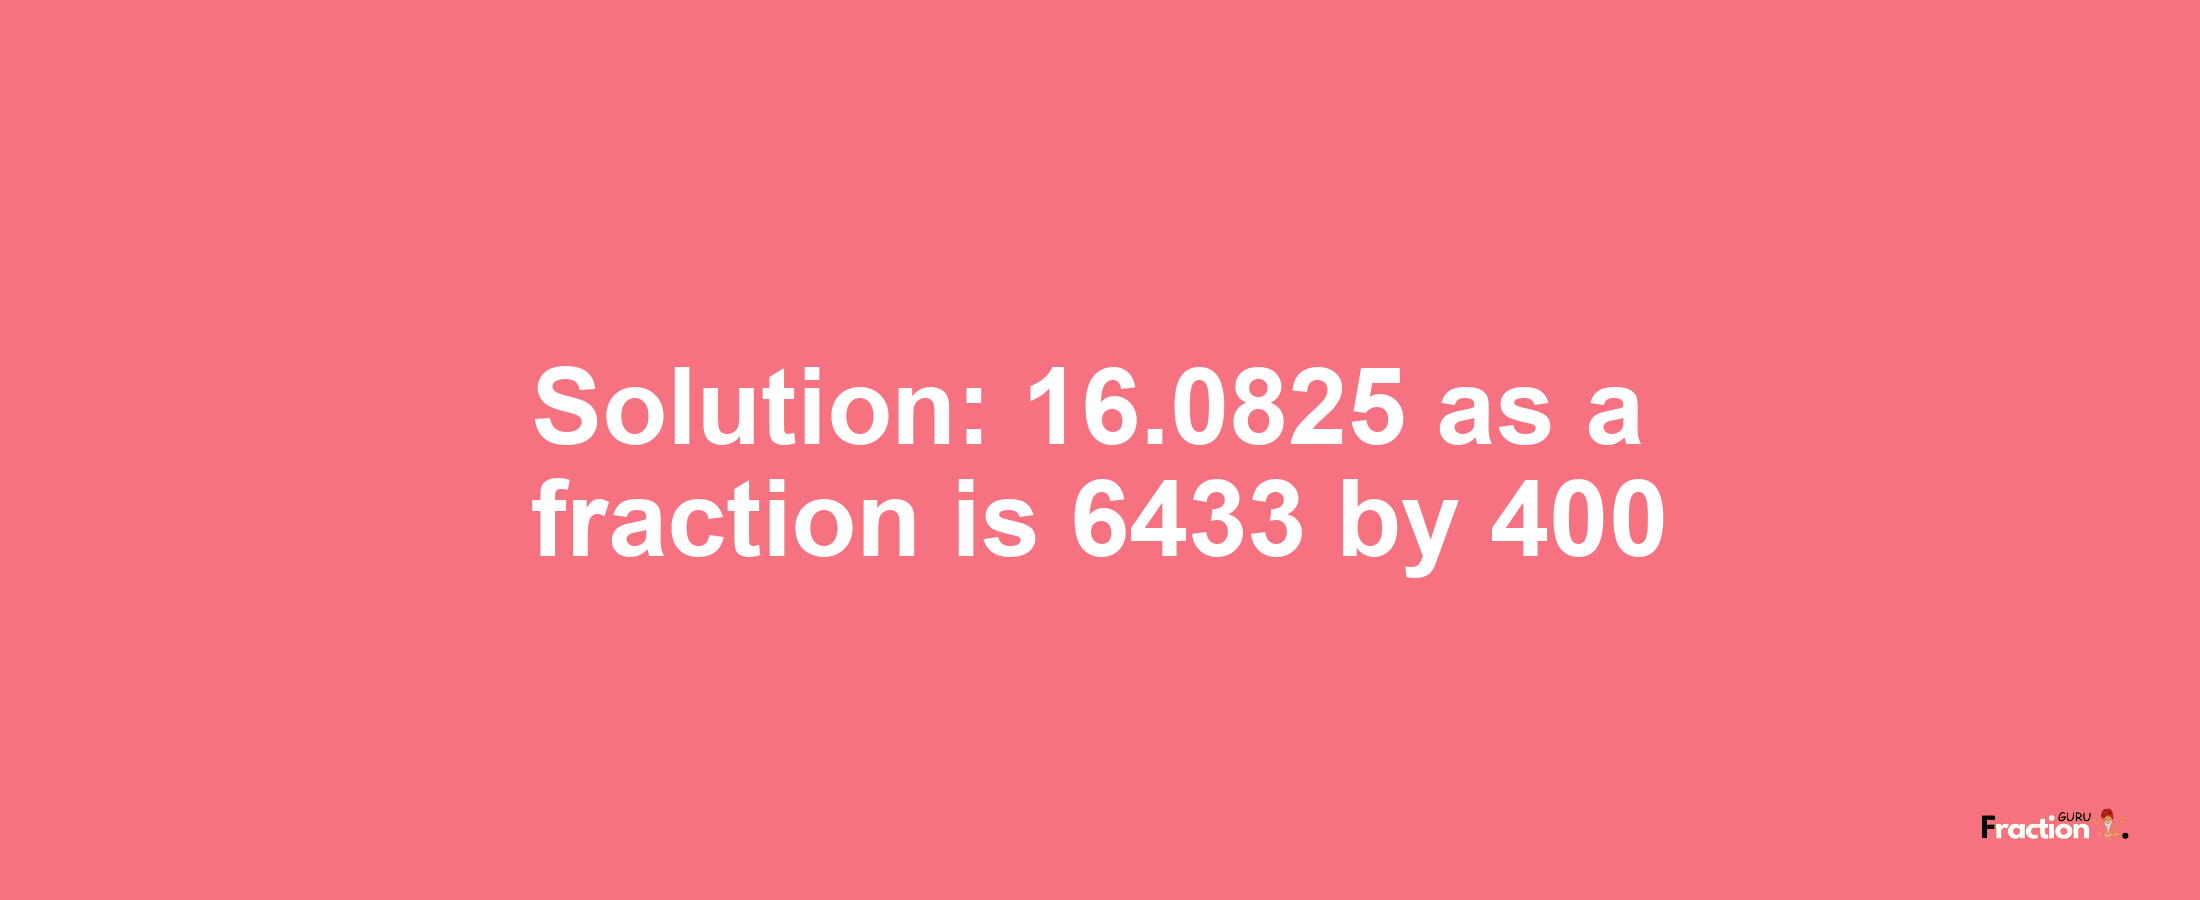 Solution:16.0825 as a fraction is 6433/400